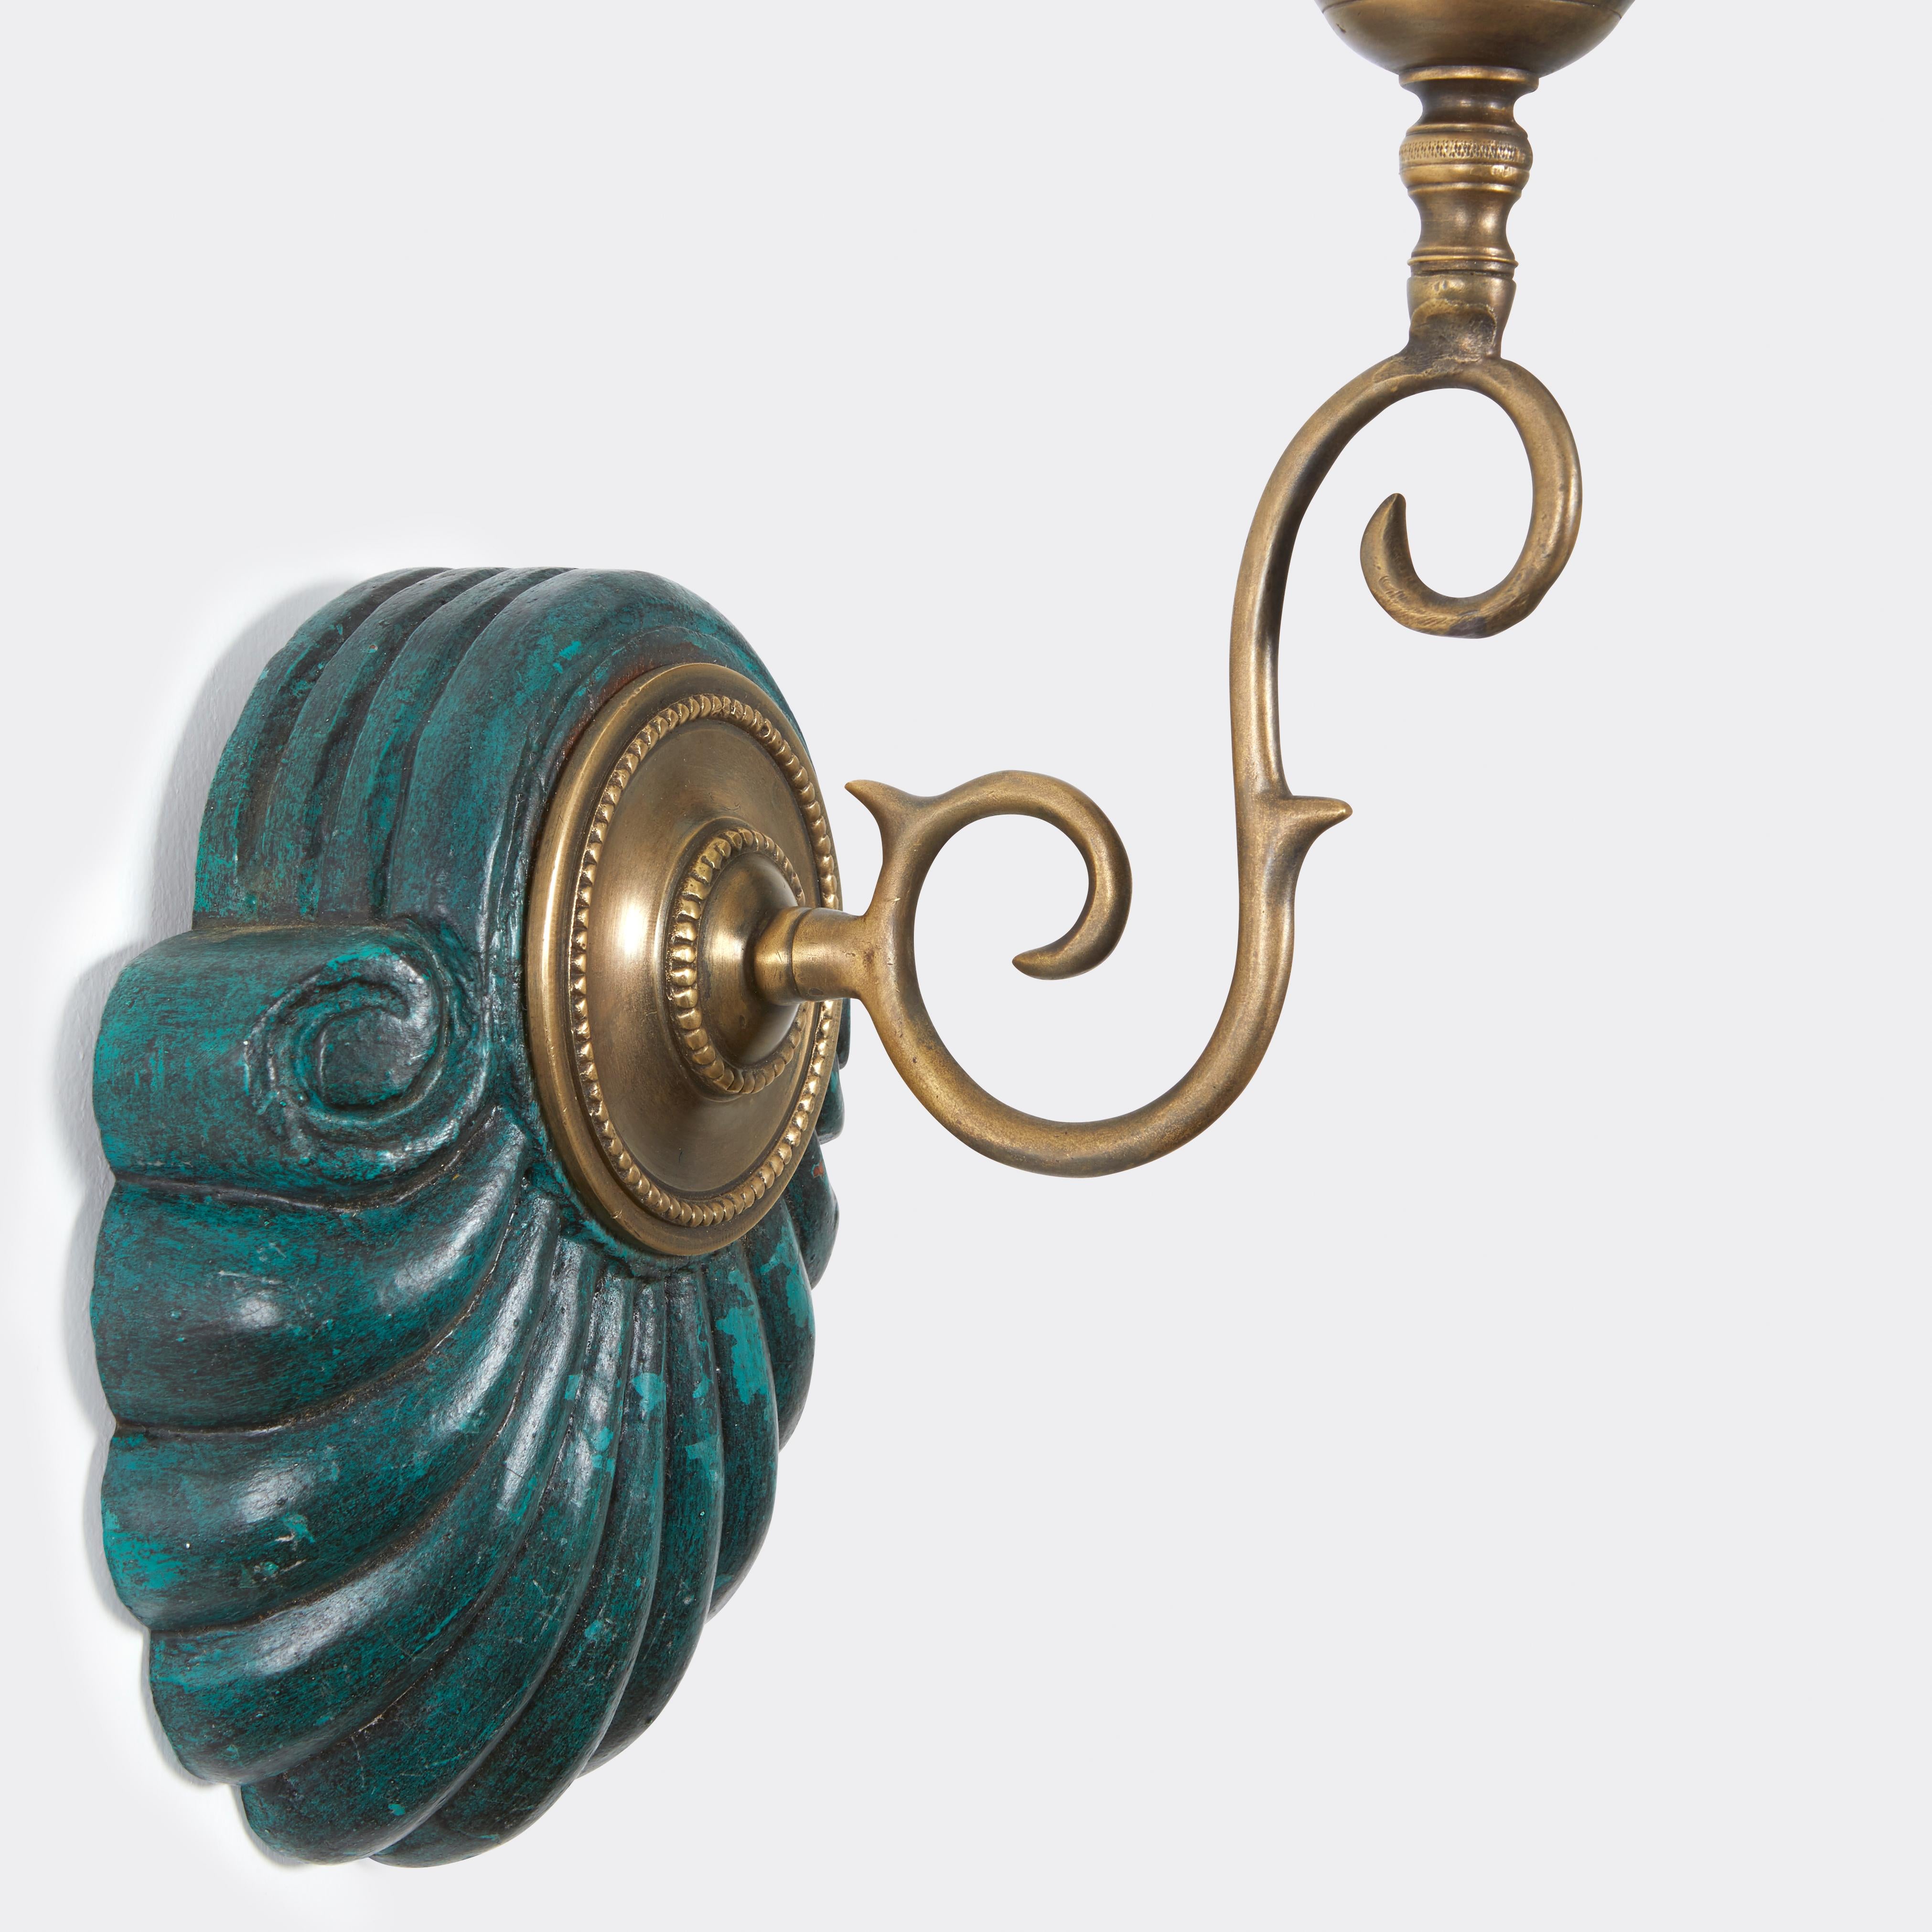 A pair of hand-carved shell form Anglo Indian backplates with a verdigris painted surface, brass sconce fittings and light green hurricane shades. Sconce is measured from bottom of backplate to top of shade height 23